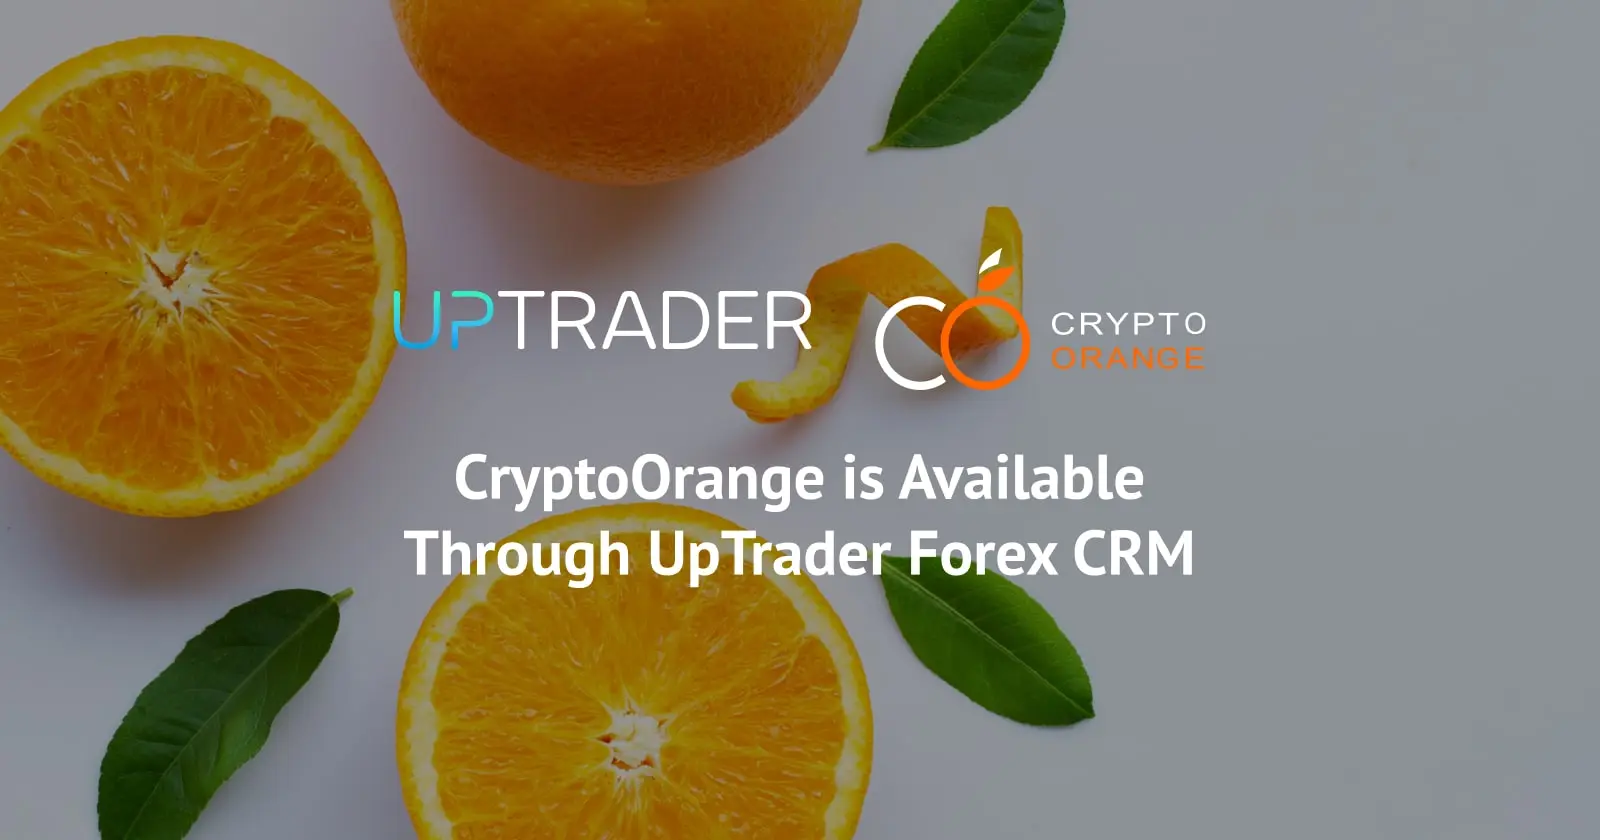 CryptoOrange is Available Through UpTrader Forex CRM